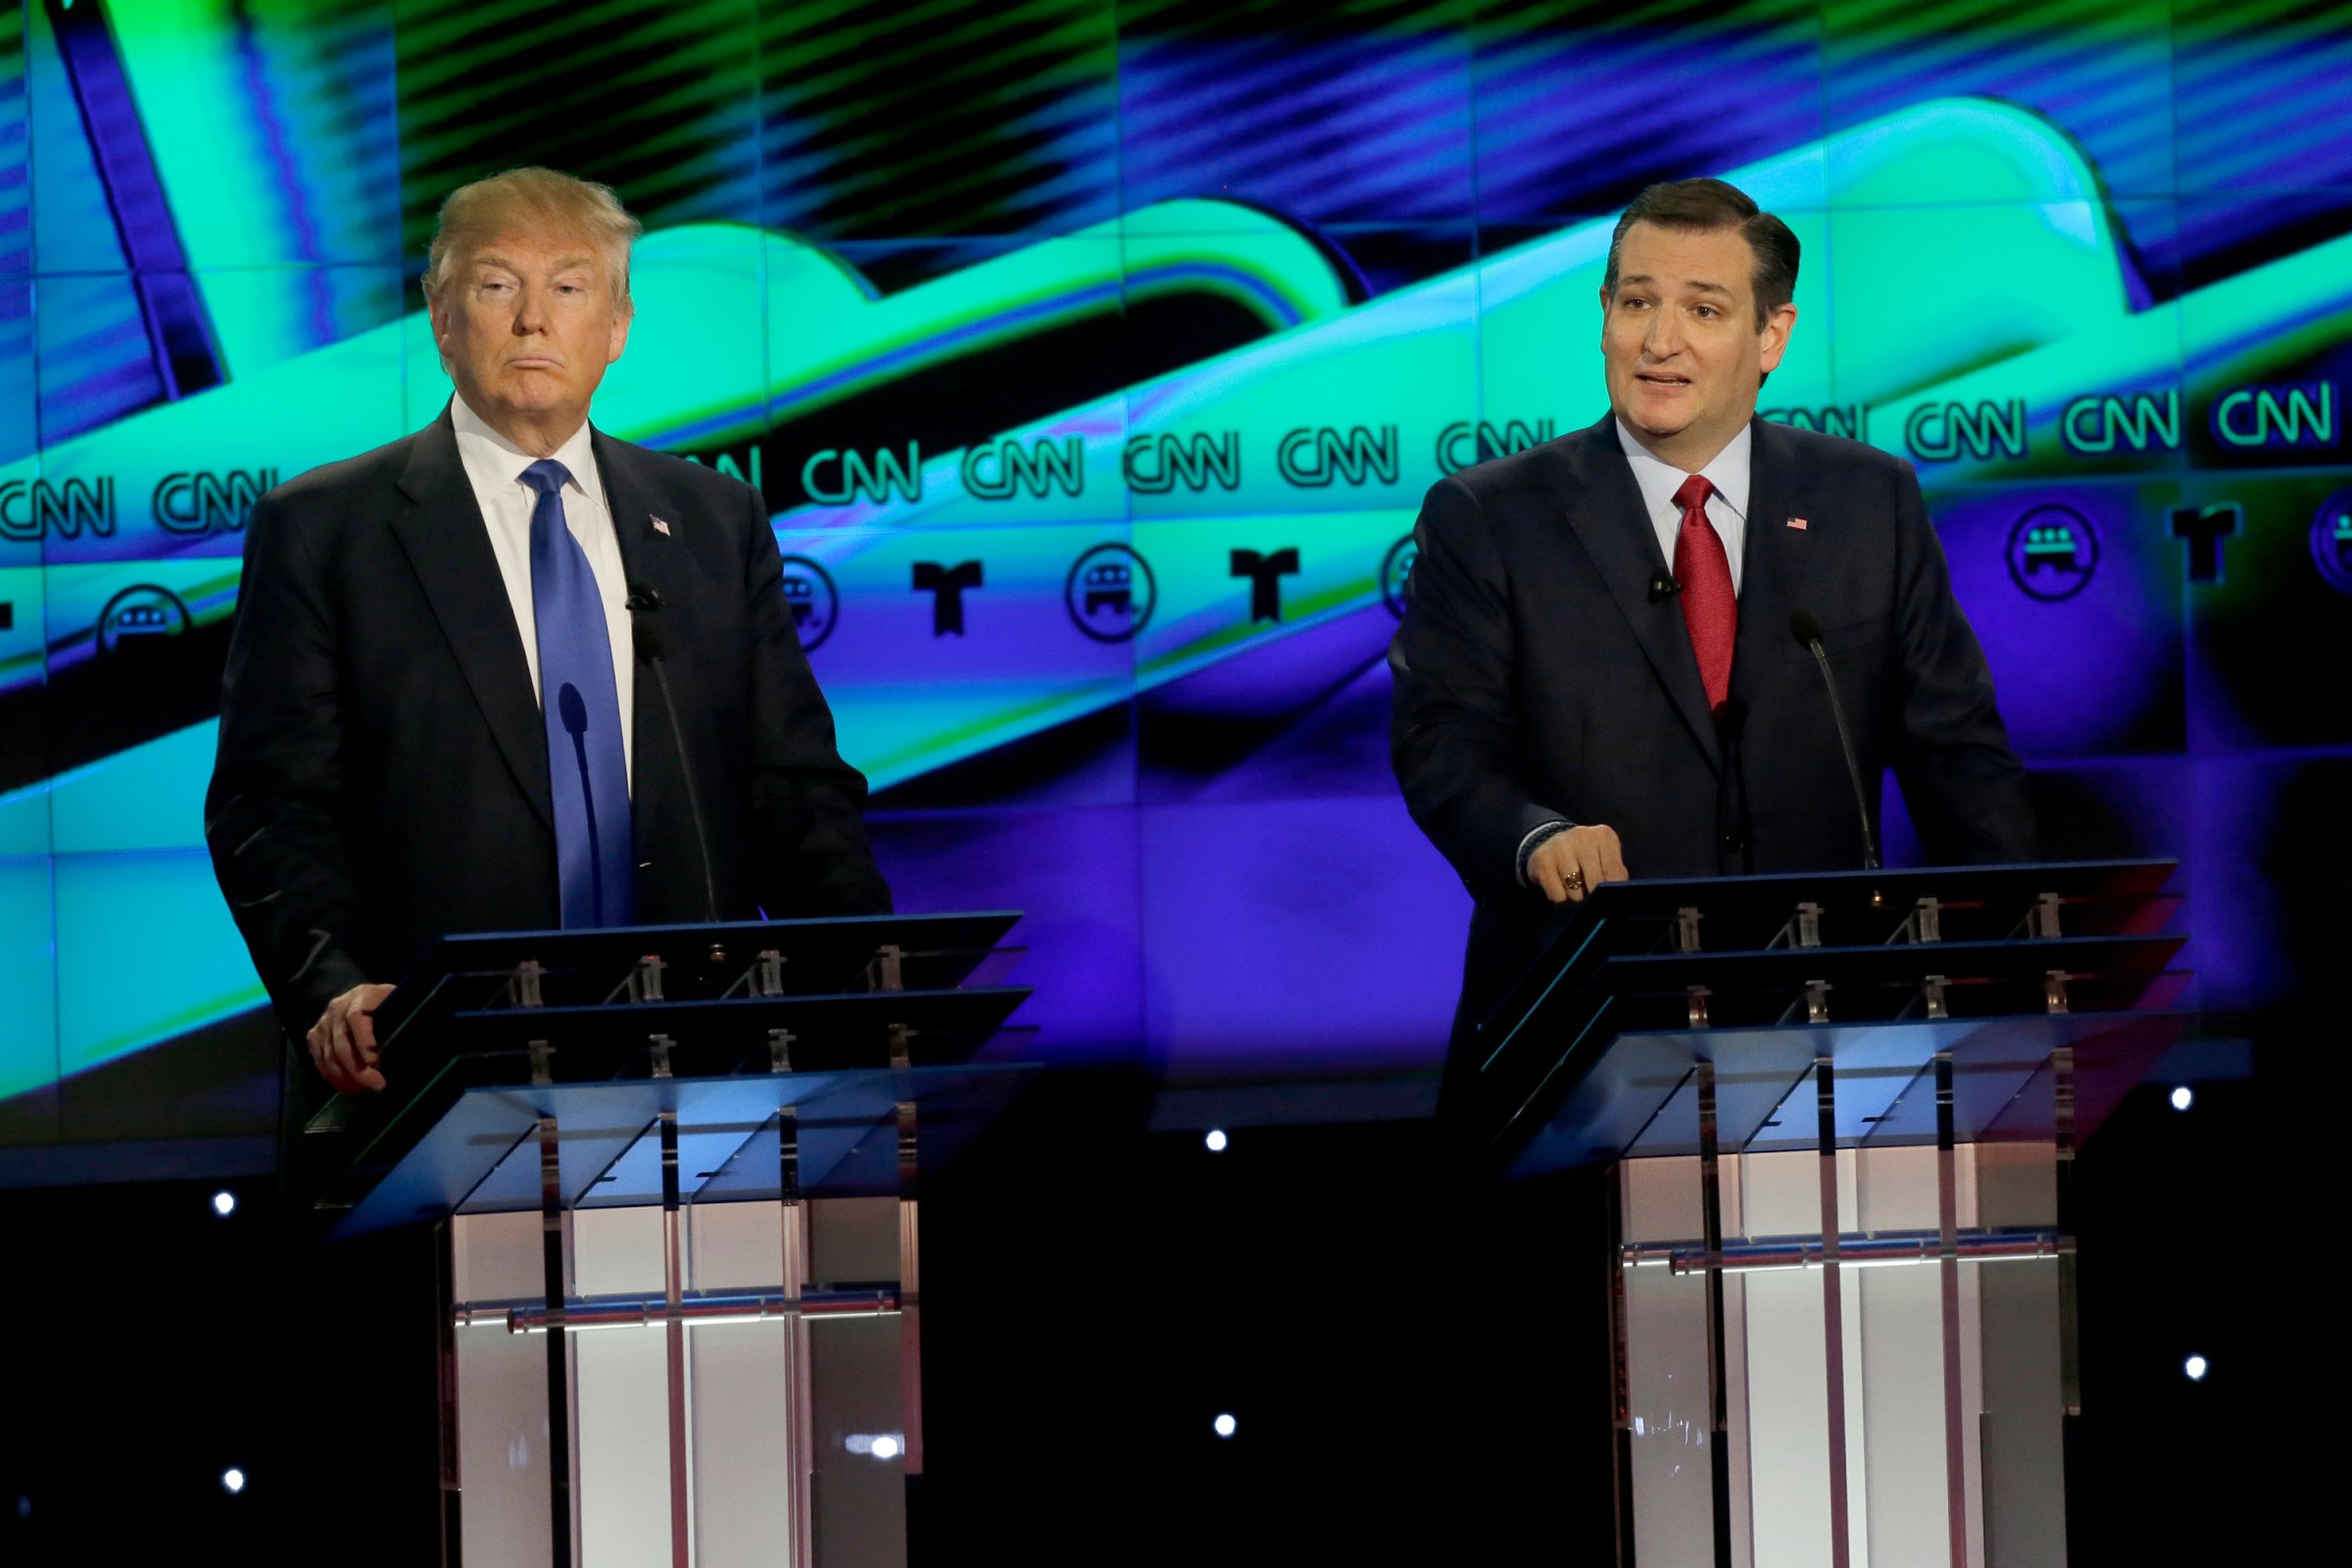 TELEMUNDO EVENTS -- Pictured: (l-r) Republican presidential candidates Donald Trump and Sen. Ted Cruz (R-TX) at the Republican presidential primary candidate debate sponsored by CNN and Telemundo at the University of Houston in Houston, TX, on February 25, 2016. Emmy Award-Winning journalist María Celeste Arrarás is as a panelist on the only Republican debate to specifically address Latino issues this primary cycle, produced in partnership with CNN and the Salem Media Group. The debate marks the last encounter among Republican presidential hopefuls before Super Tuesday, the day when 12 states, including Colorado and Texas, choose their Republican presidential nominees. -- (Photo by: Bob Levey/Telemundo)